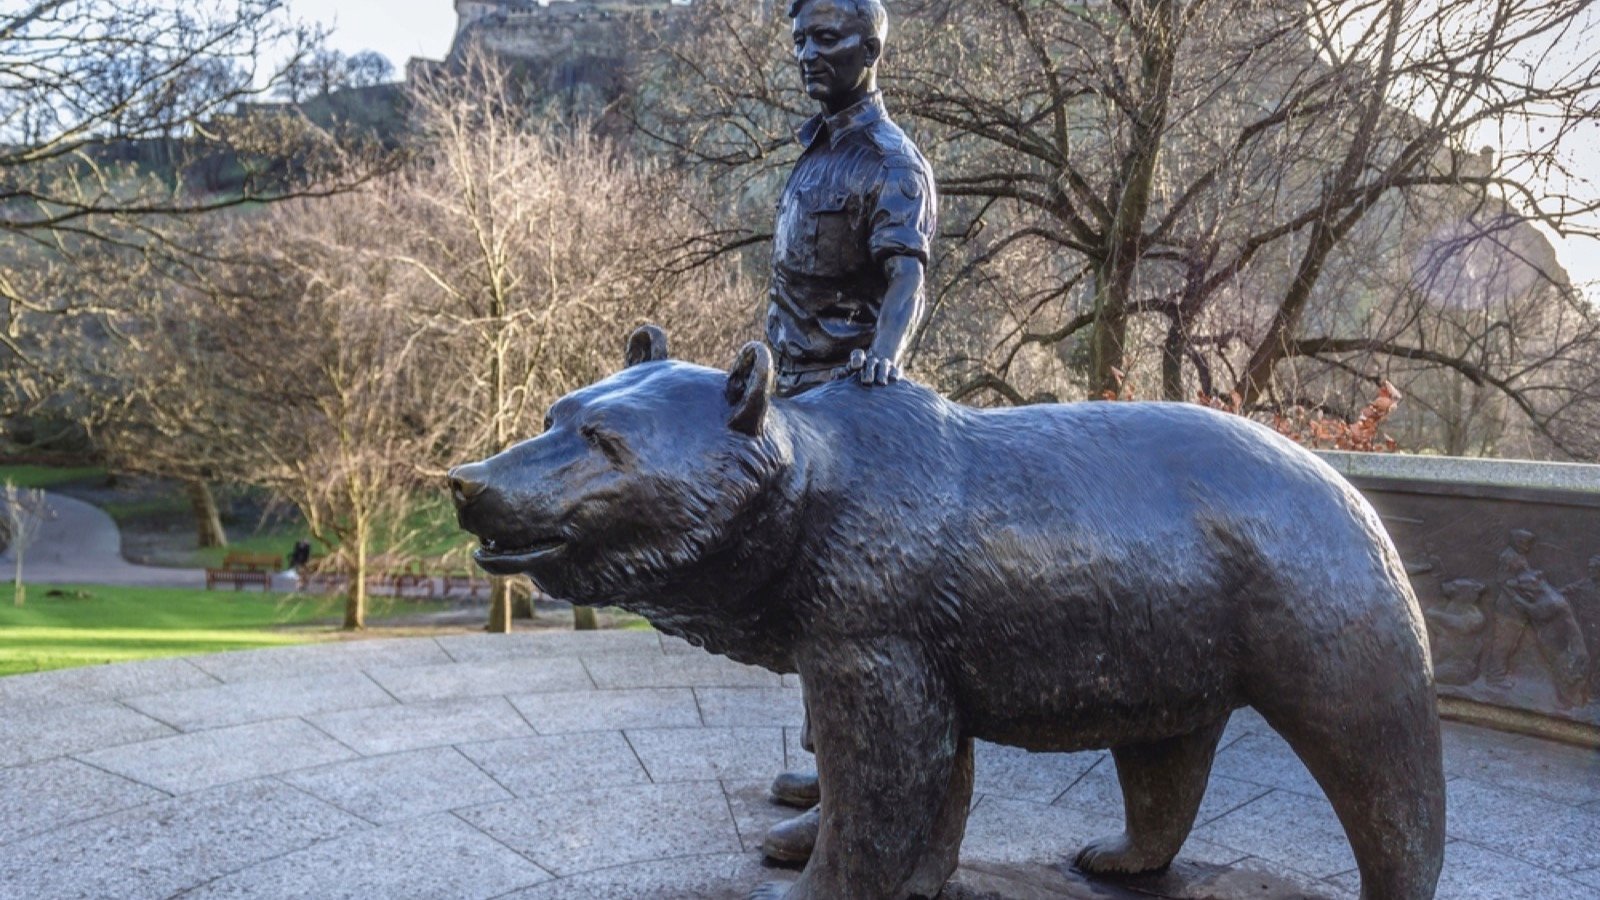 <p>Polish troops evacuated from the USSR to Iran in 1942. They traveled through Syria, and while there, they befriended a brown bear they called Wojtek and enlisted in their unit. In 1943, the unit ended up in Italy, along with Wojtek. He earned his keep by helping to carry ammunition and was very popular with the troops. When he was discharged, he went to Edinburgh Zoo and lived peacefully until 1963.</p>